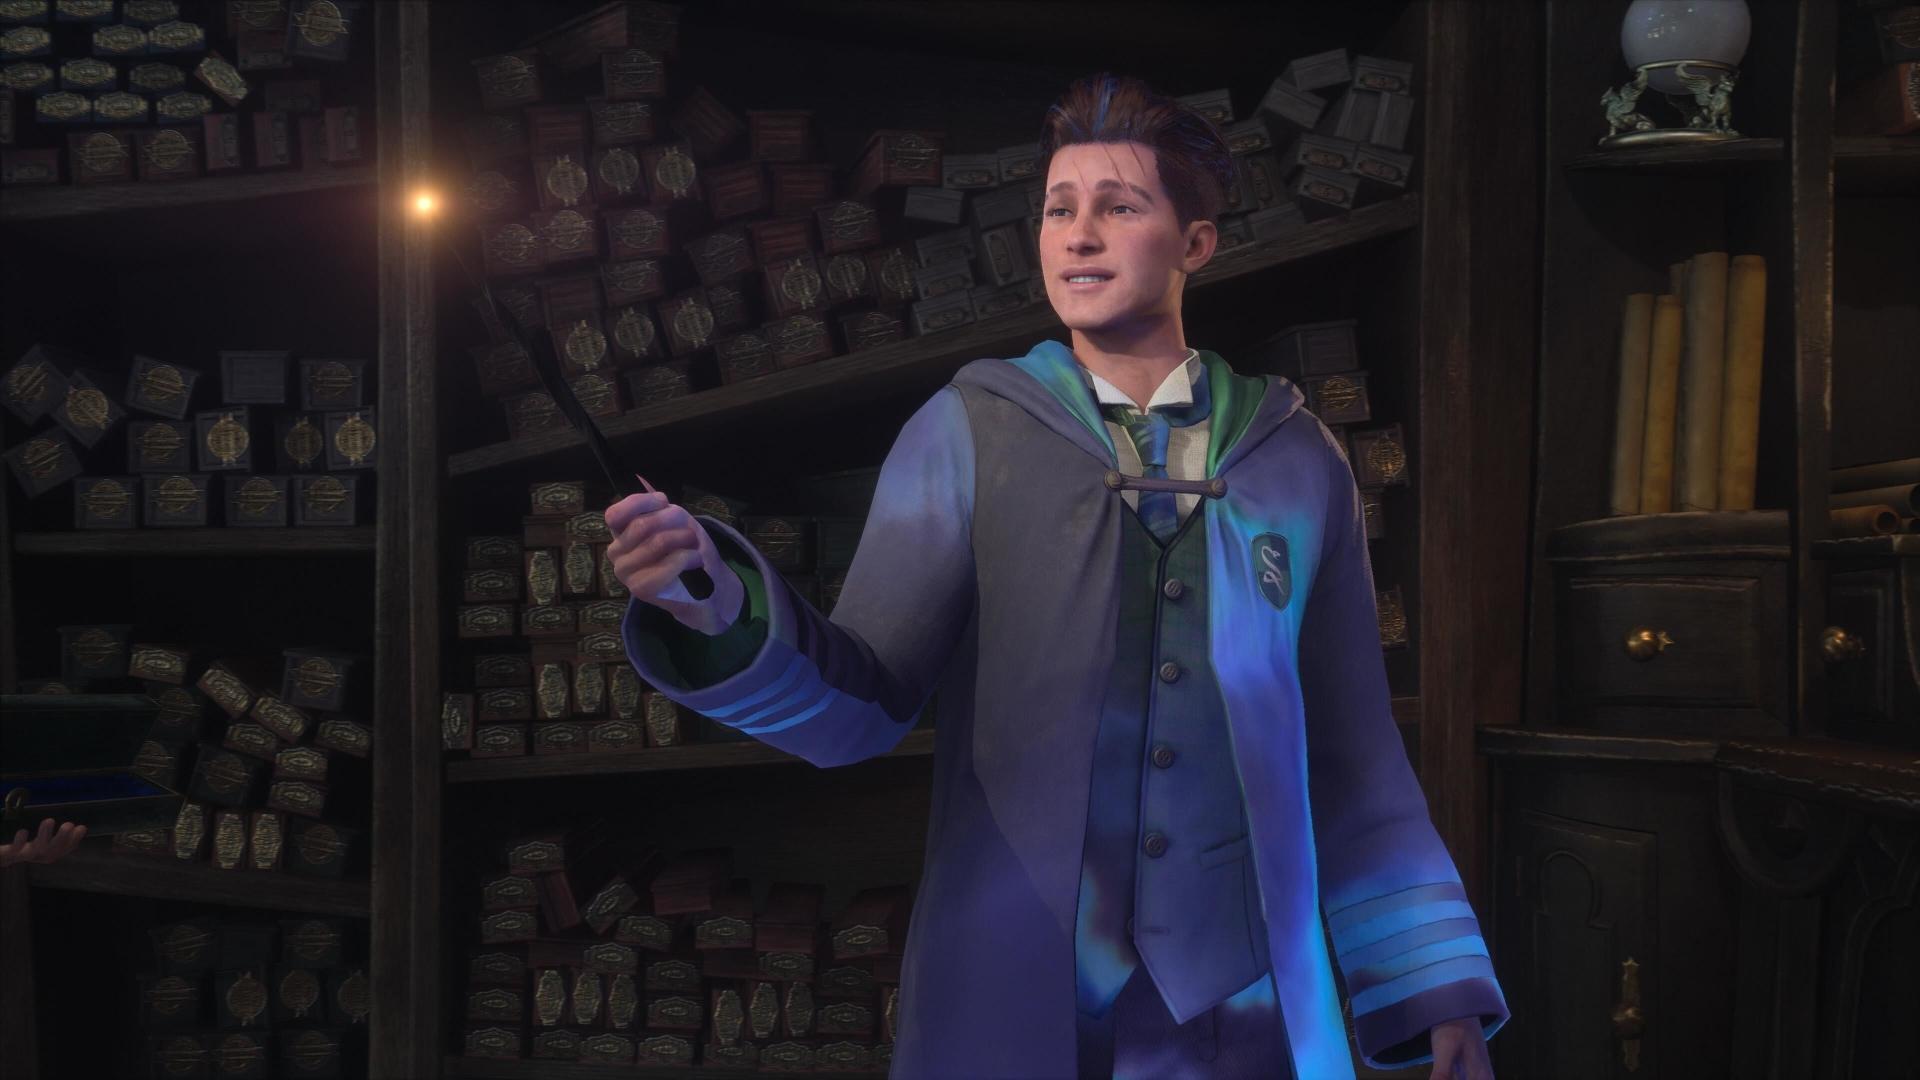 Incredible Hogwarts Legacy Gameplay Shows A Huge World Of Wizardry